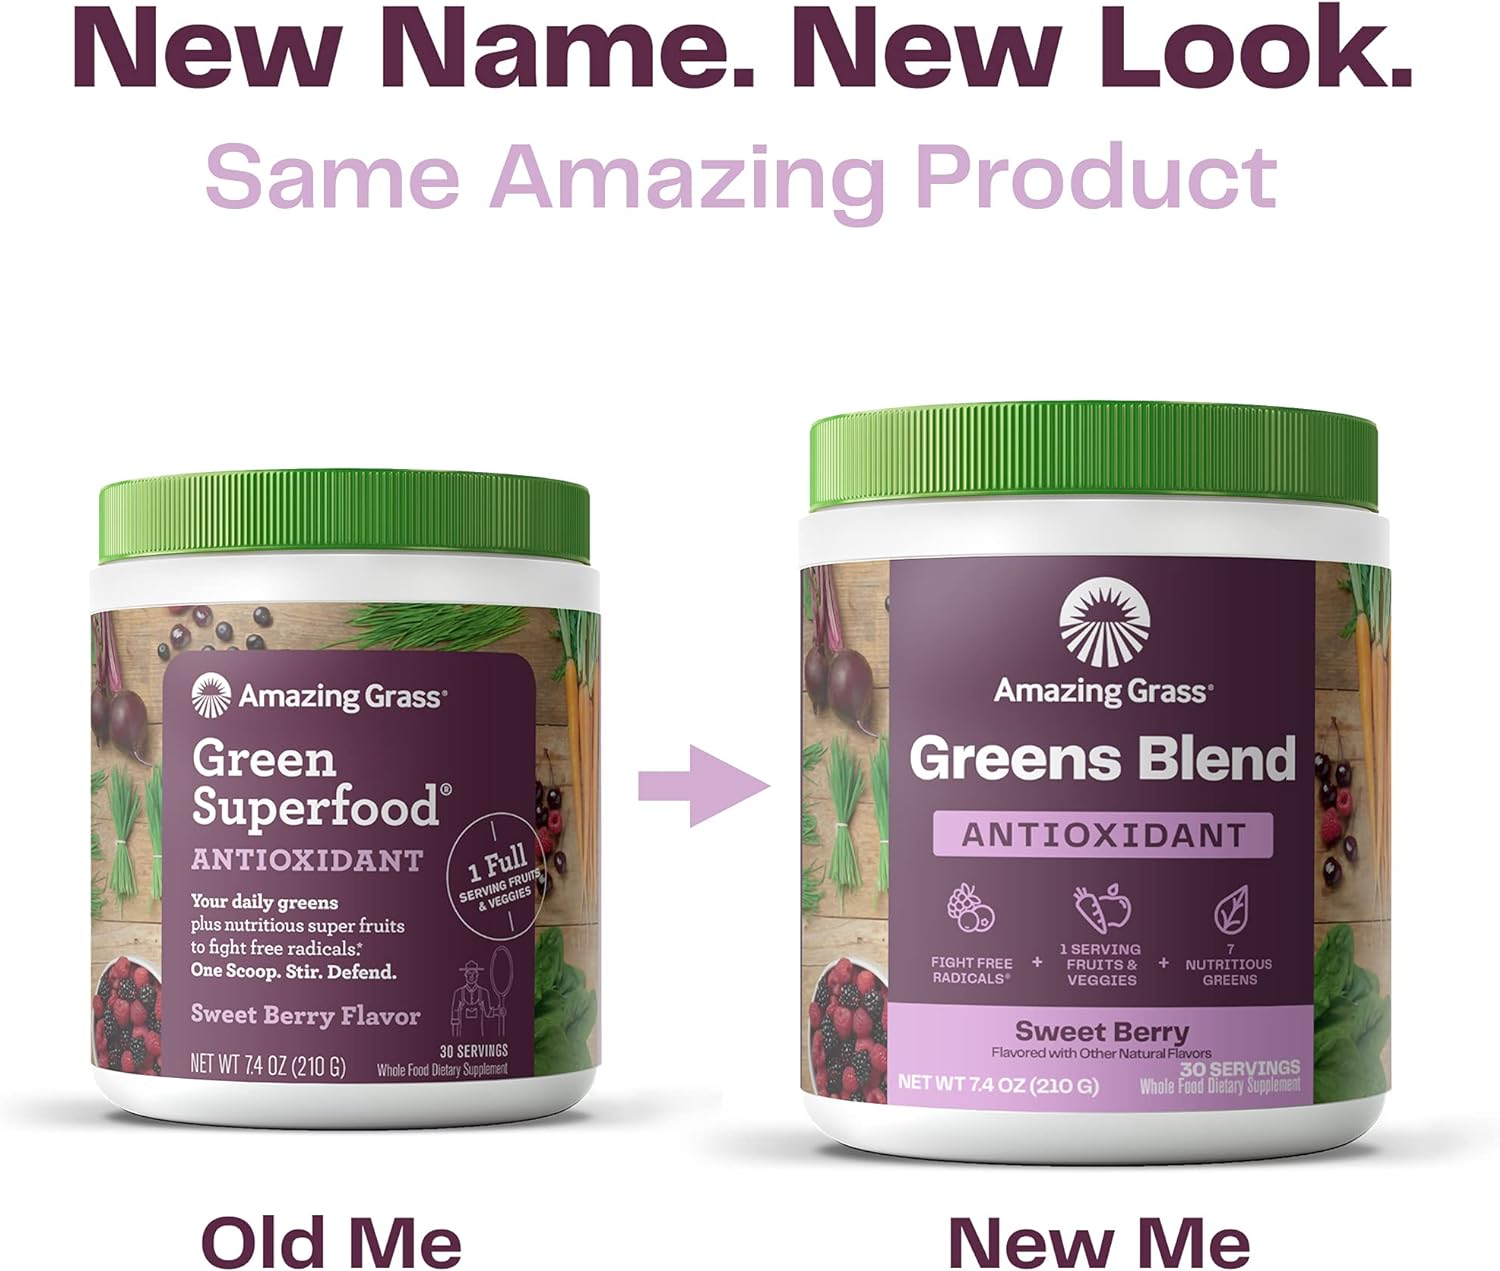 Amazing Grass Greens Blend Antioxidant: Super Greens Powder Smoothie Mix with Organic Spirulina, Beet Root Powder, Elderberry Probiotics, Sweet Berry, 60 Servings (Packaging May Vary)